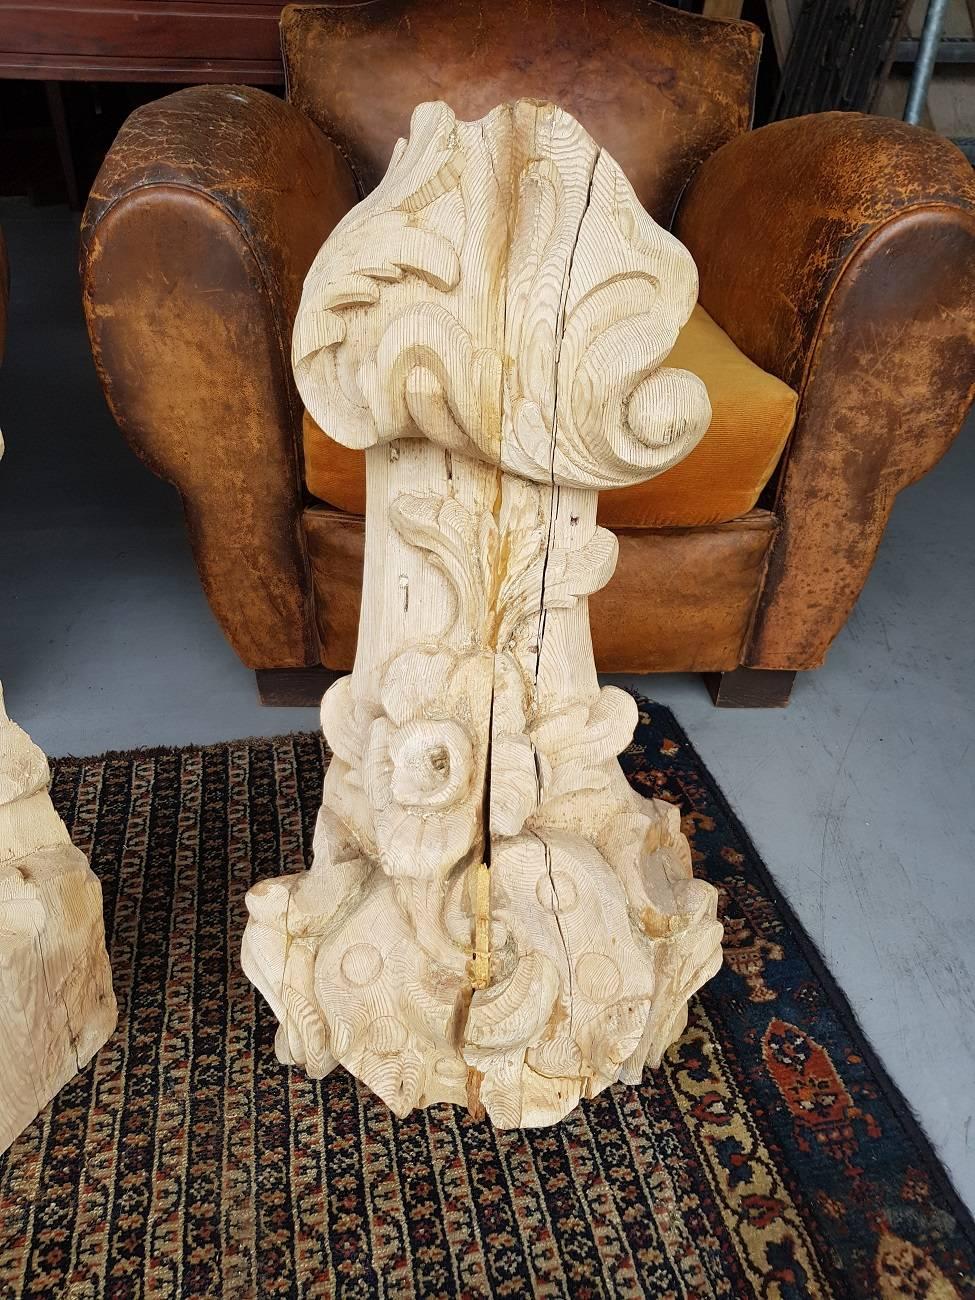 Hand-Carved 18th Century Dutch Carved Wooden Architectural Ornaments For Sale